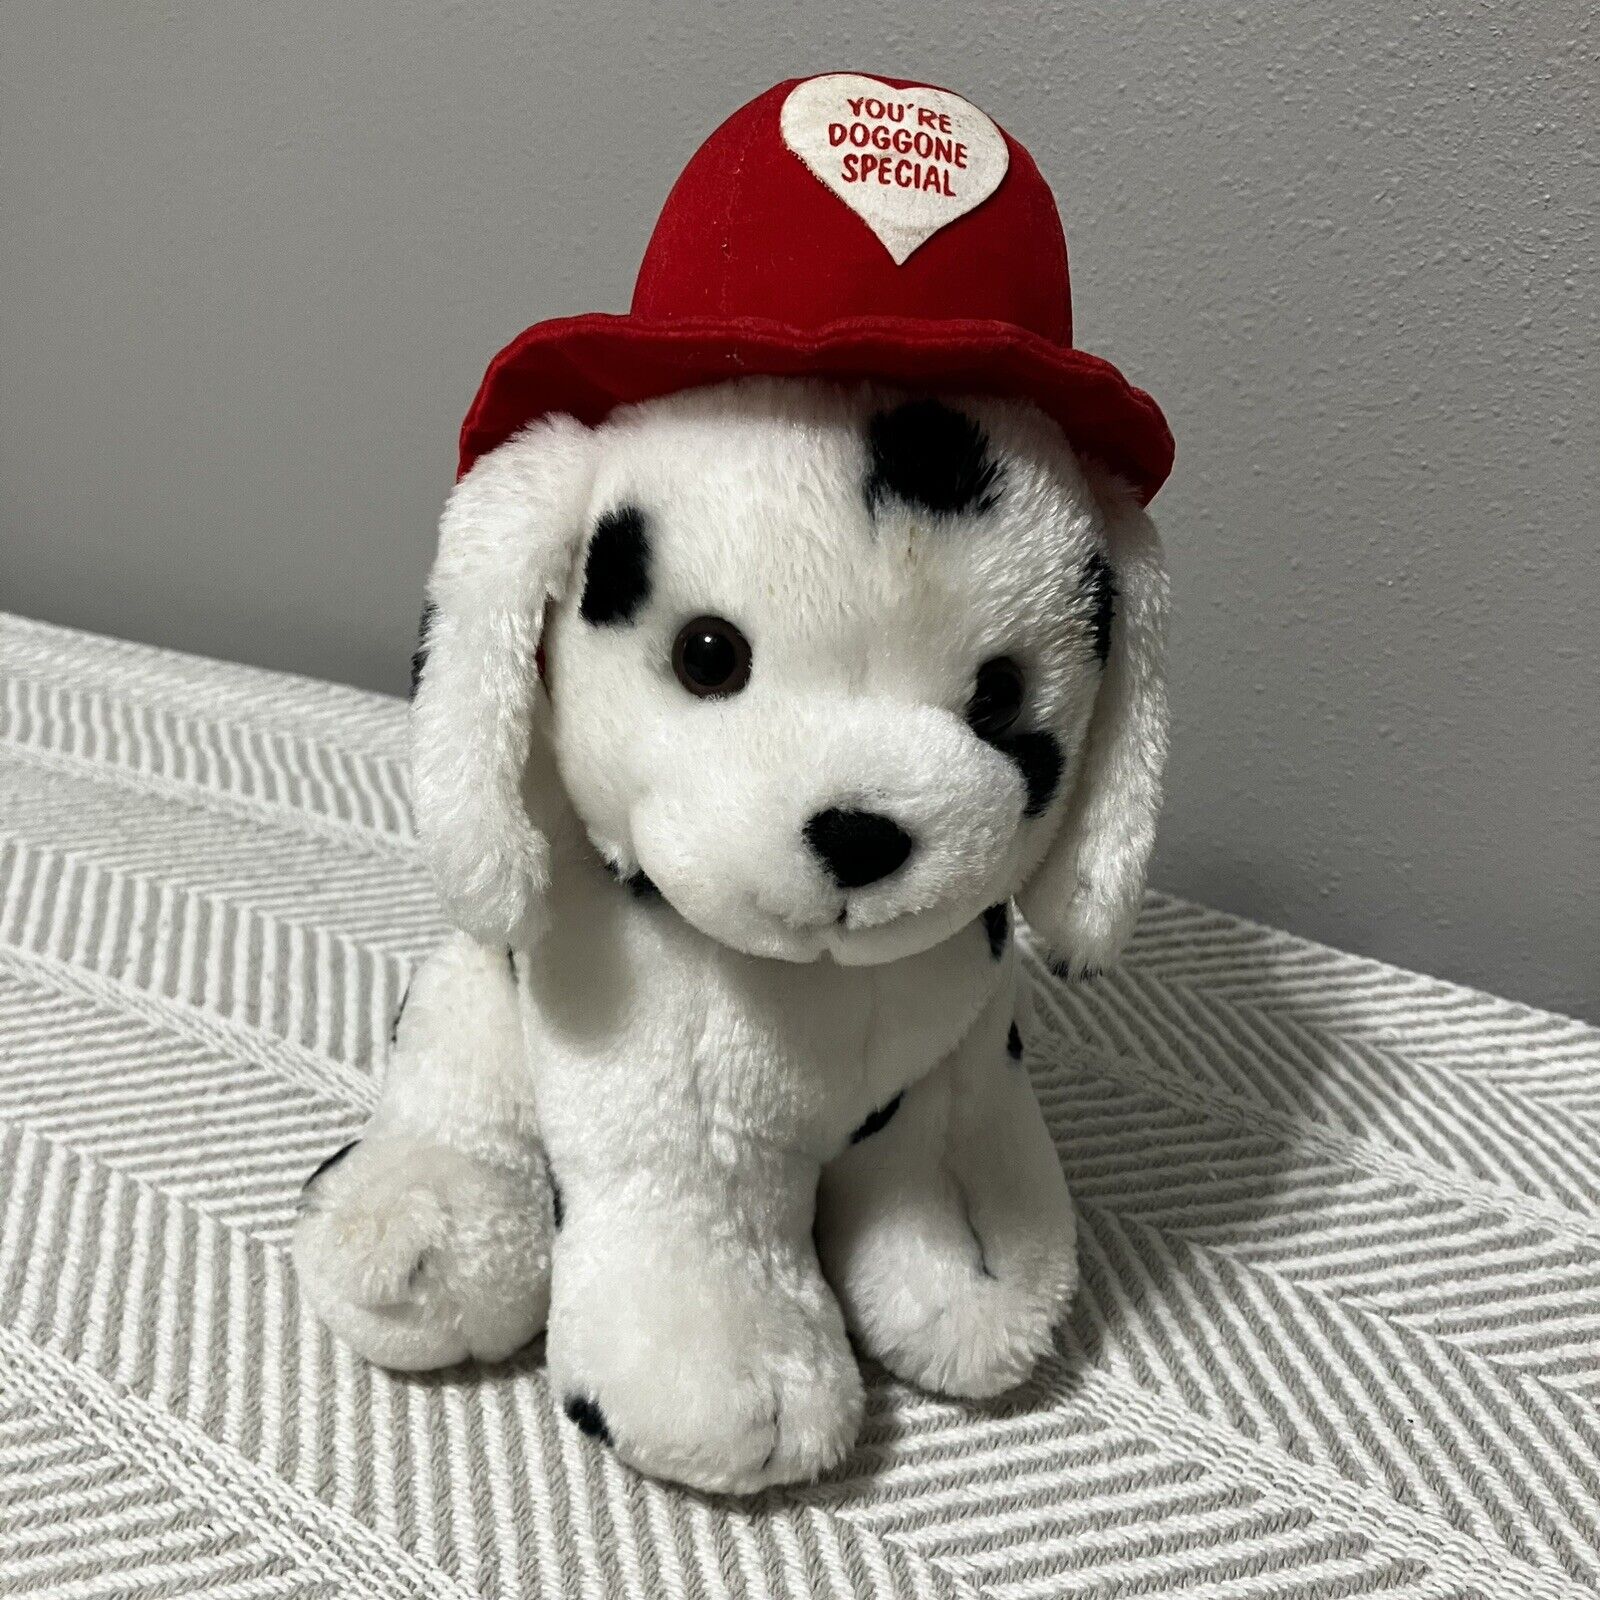 Dalmation Dog Plush Youre Doggone Special Fire Fighter Helmet Puppy Sitting Russ